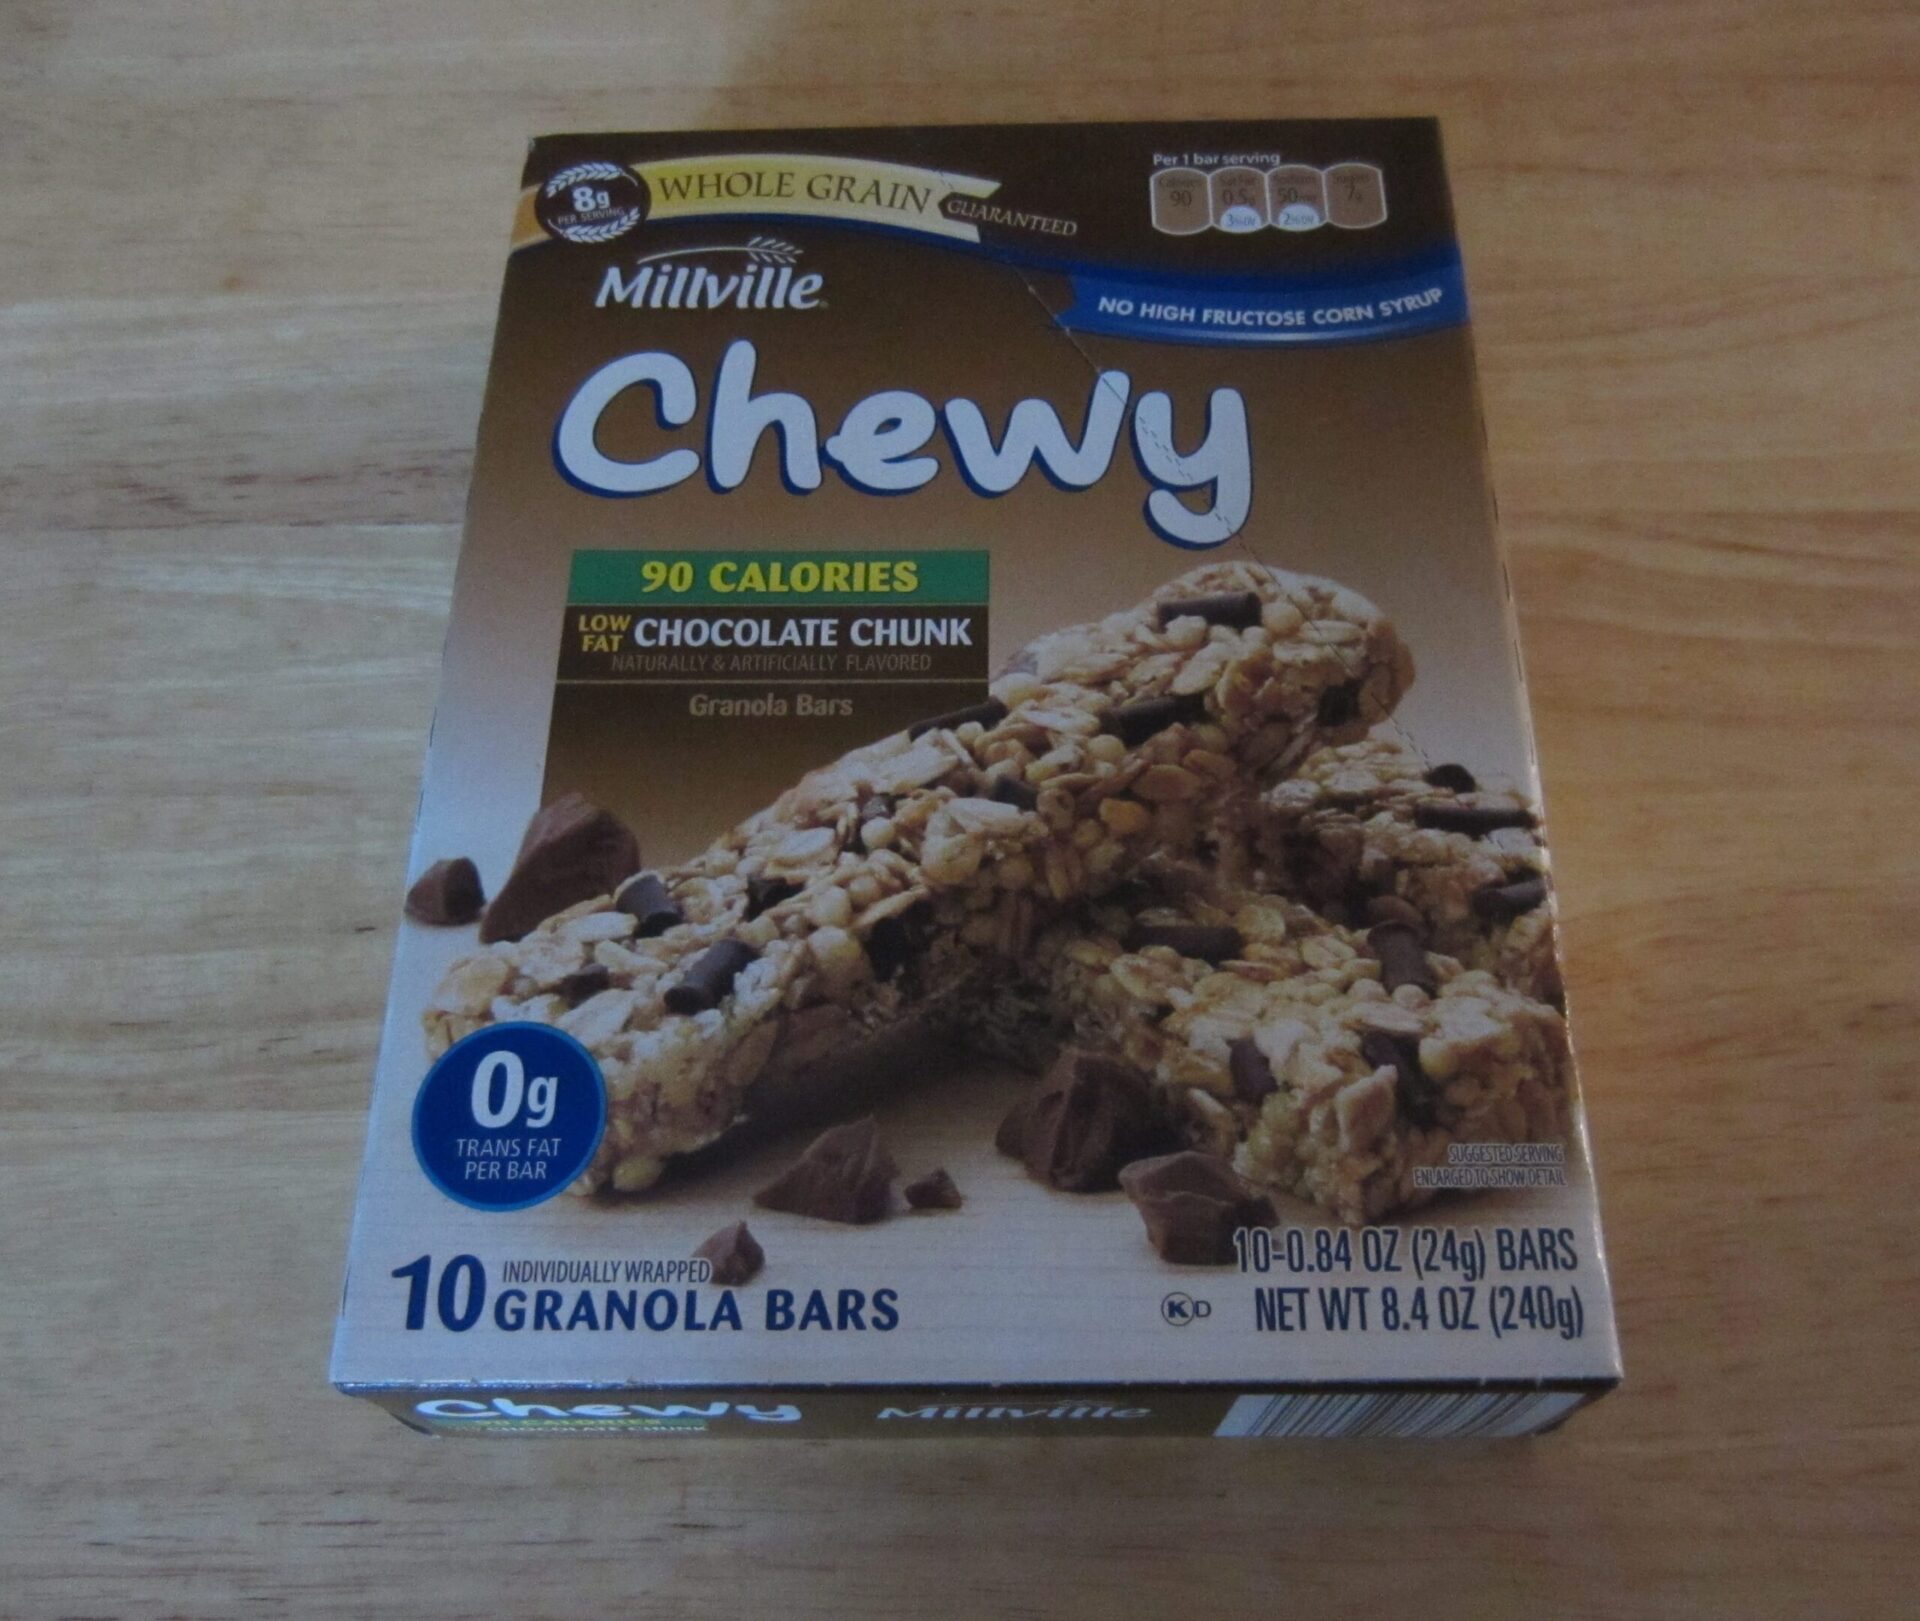 Millville Chewy Granola Bars